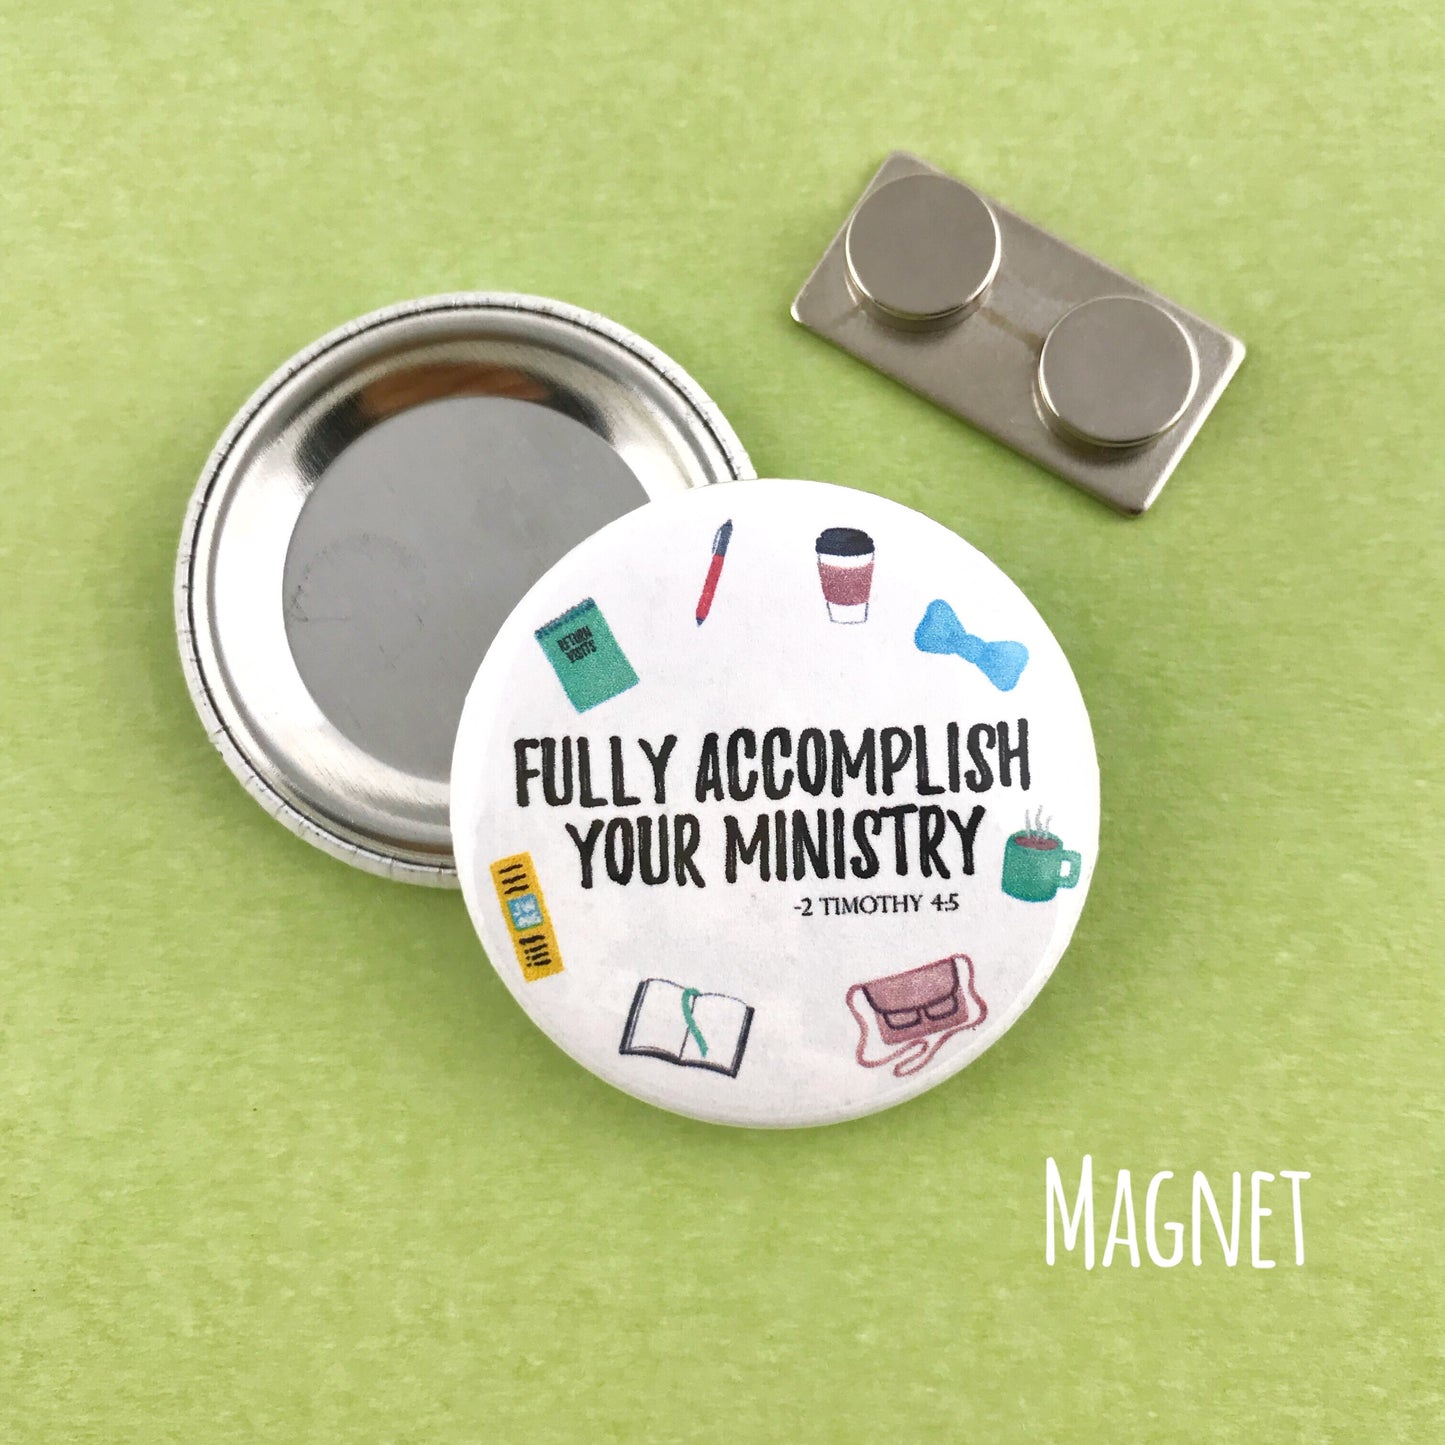 Fully accomplish your ministry JW pioneer gift magnet pin by Olive Branch Design Studio